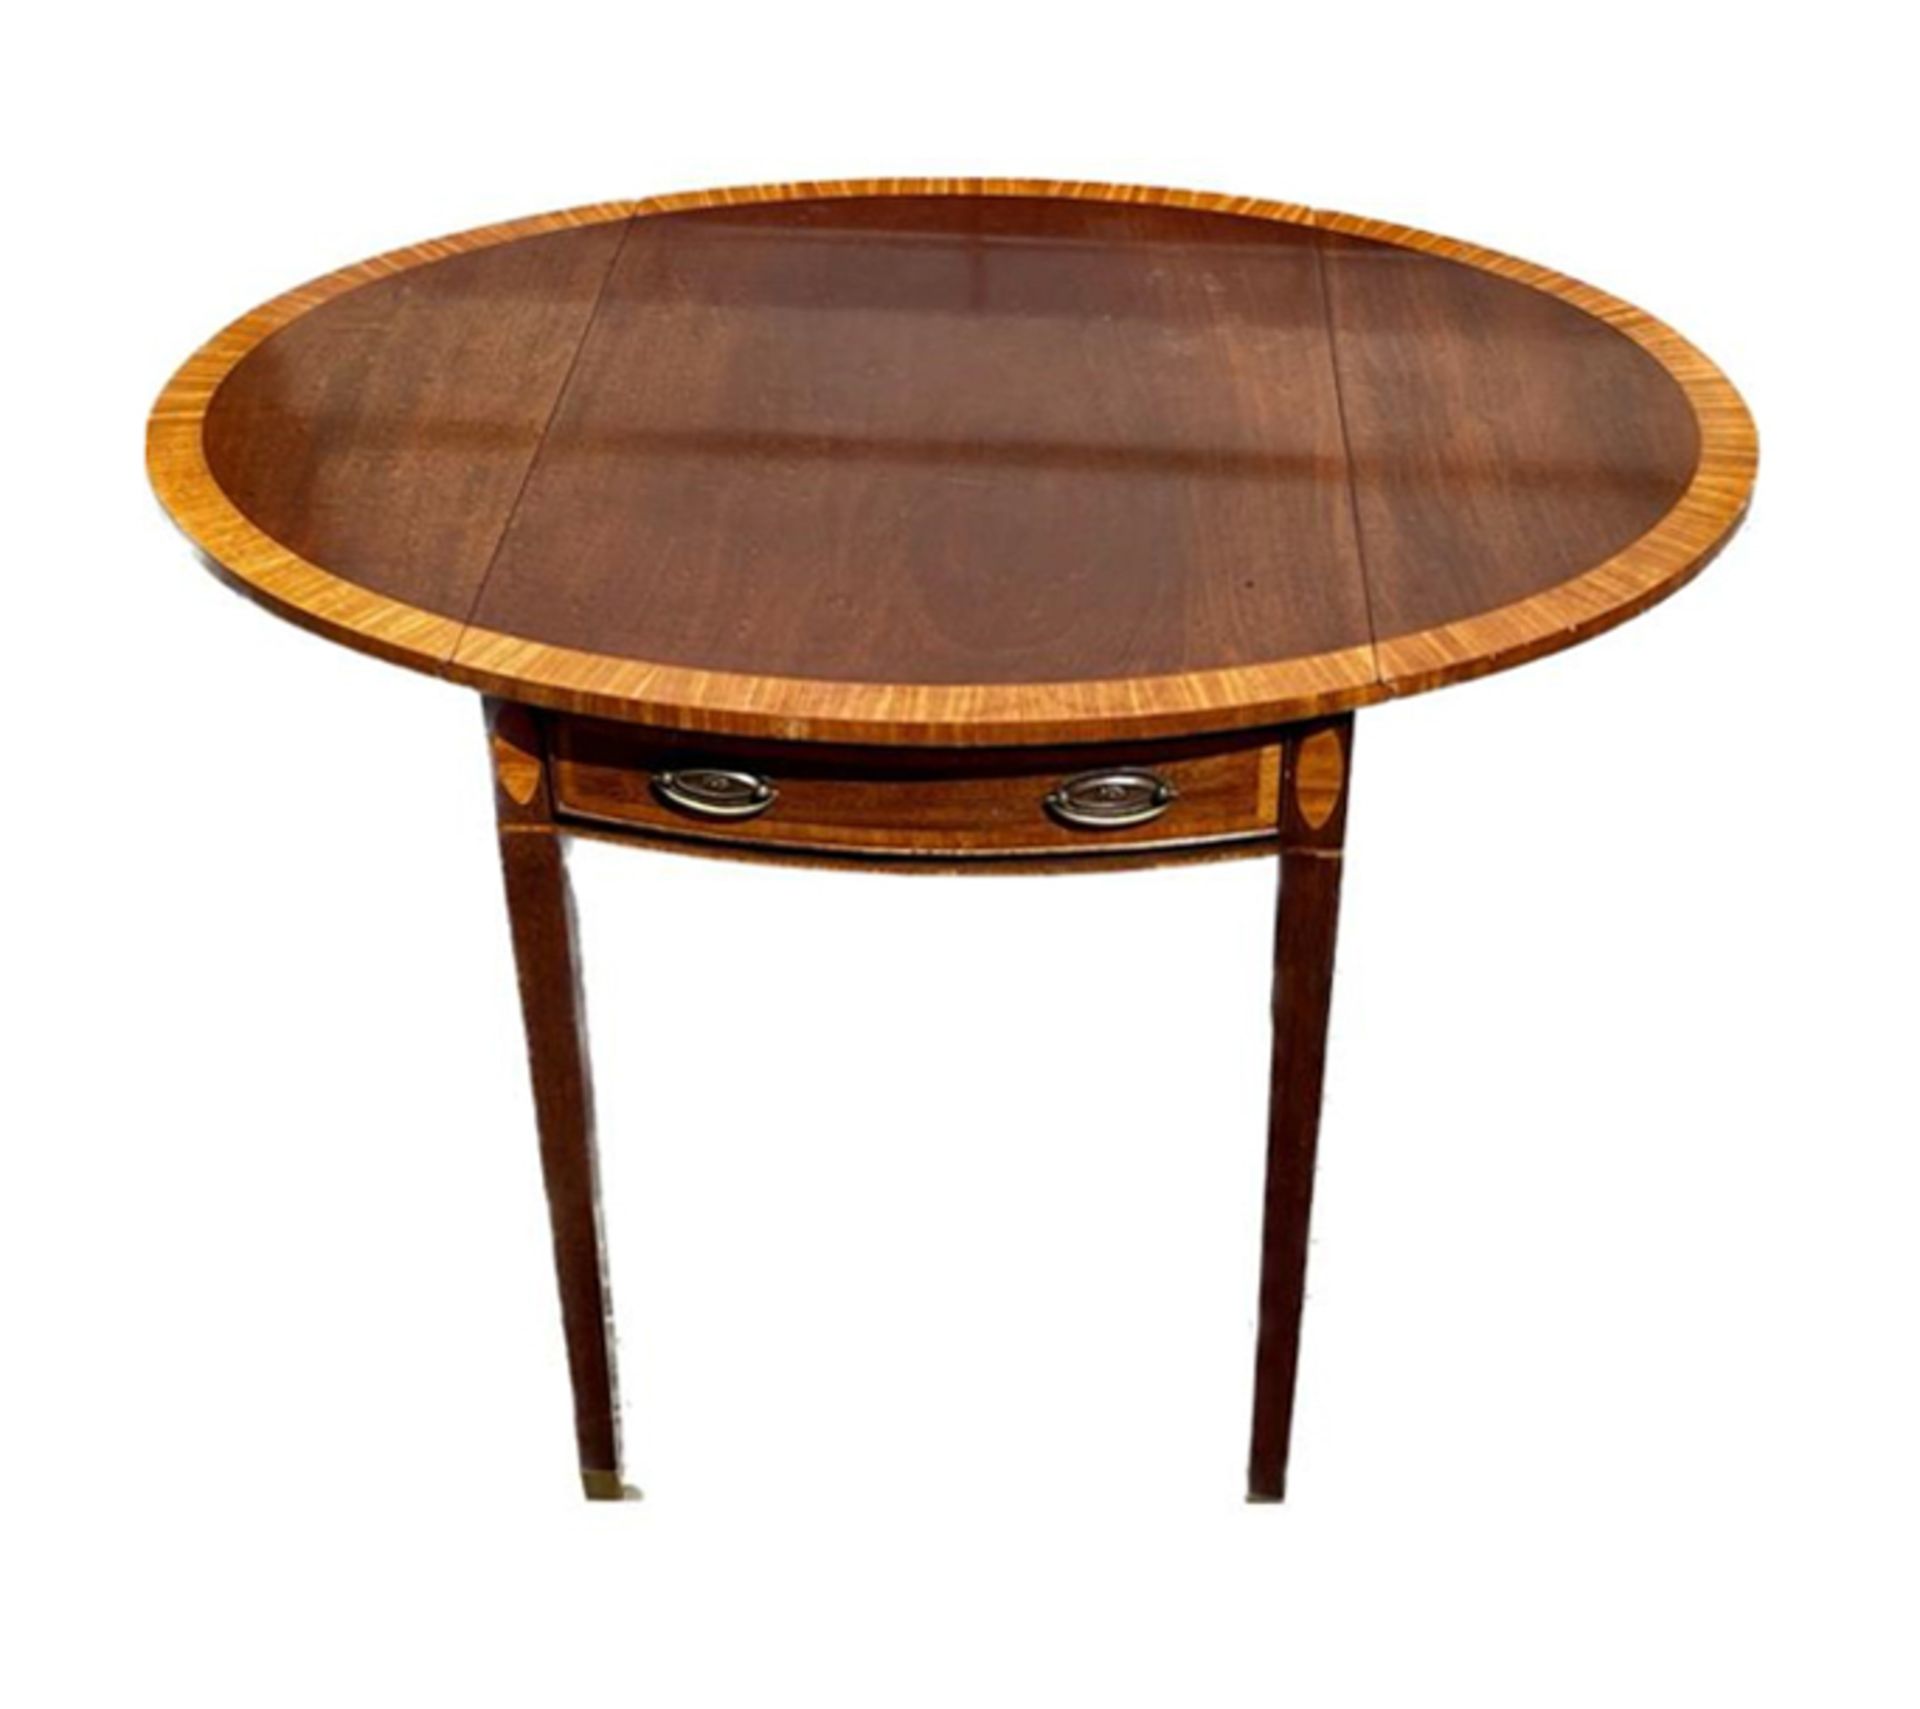 Table, England, c. 1920, rosewood and mahogany, one drawer, fold-out sides, h. 74, l. 72/100 cm.-